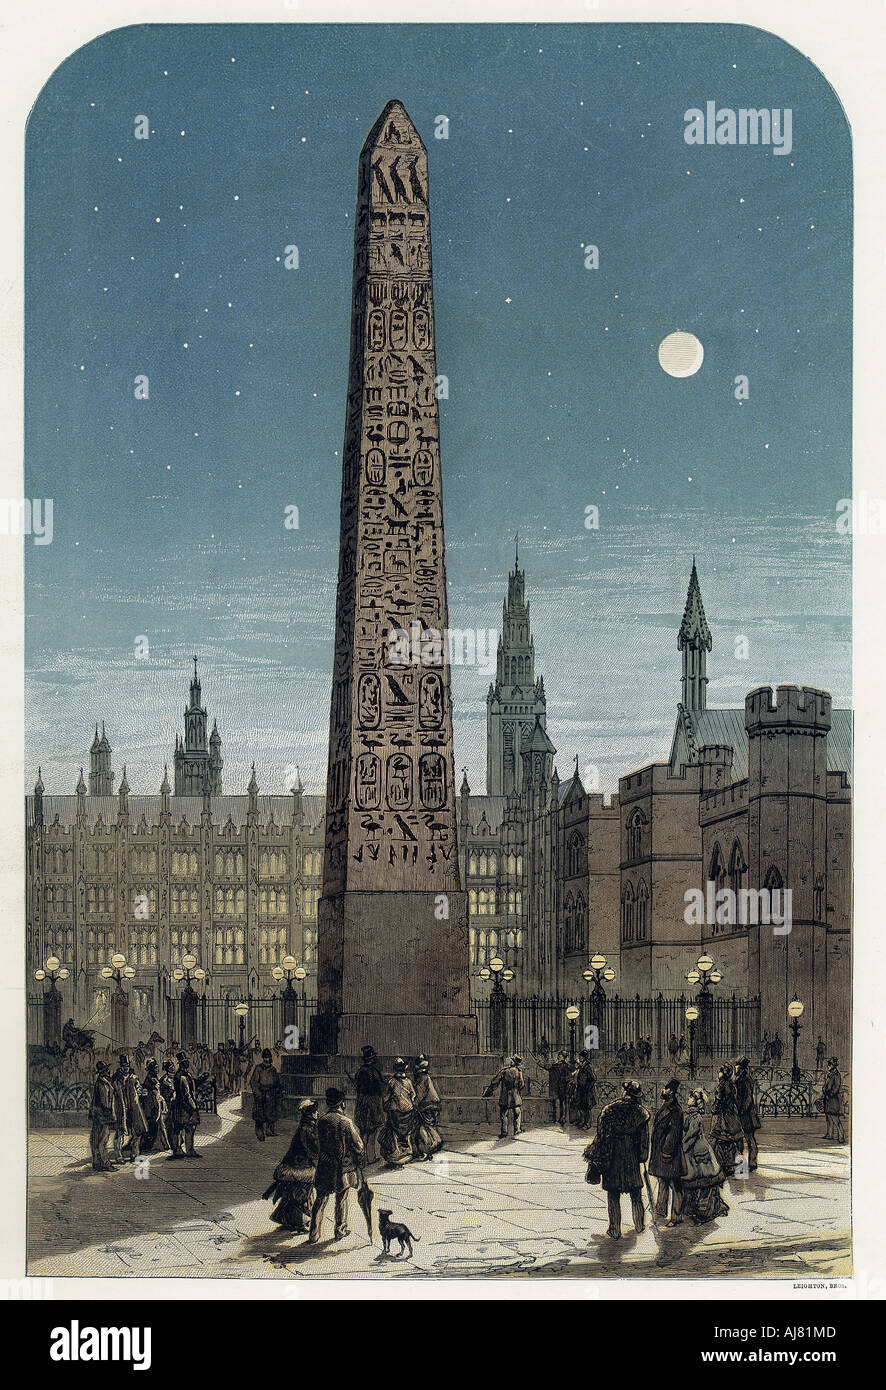 Cleopatra's Needle outside the Houses of Parliament, London, c late 19th century. Creator: Unknown. Stock Photo